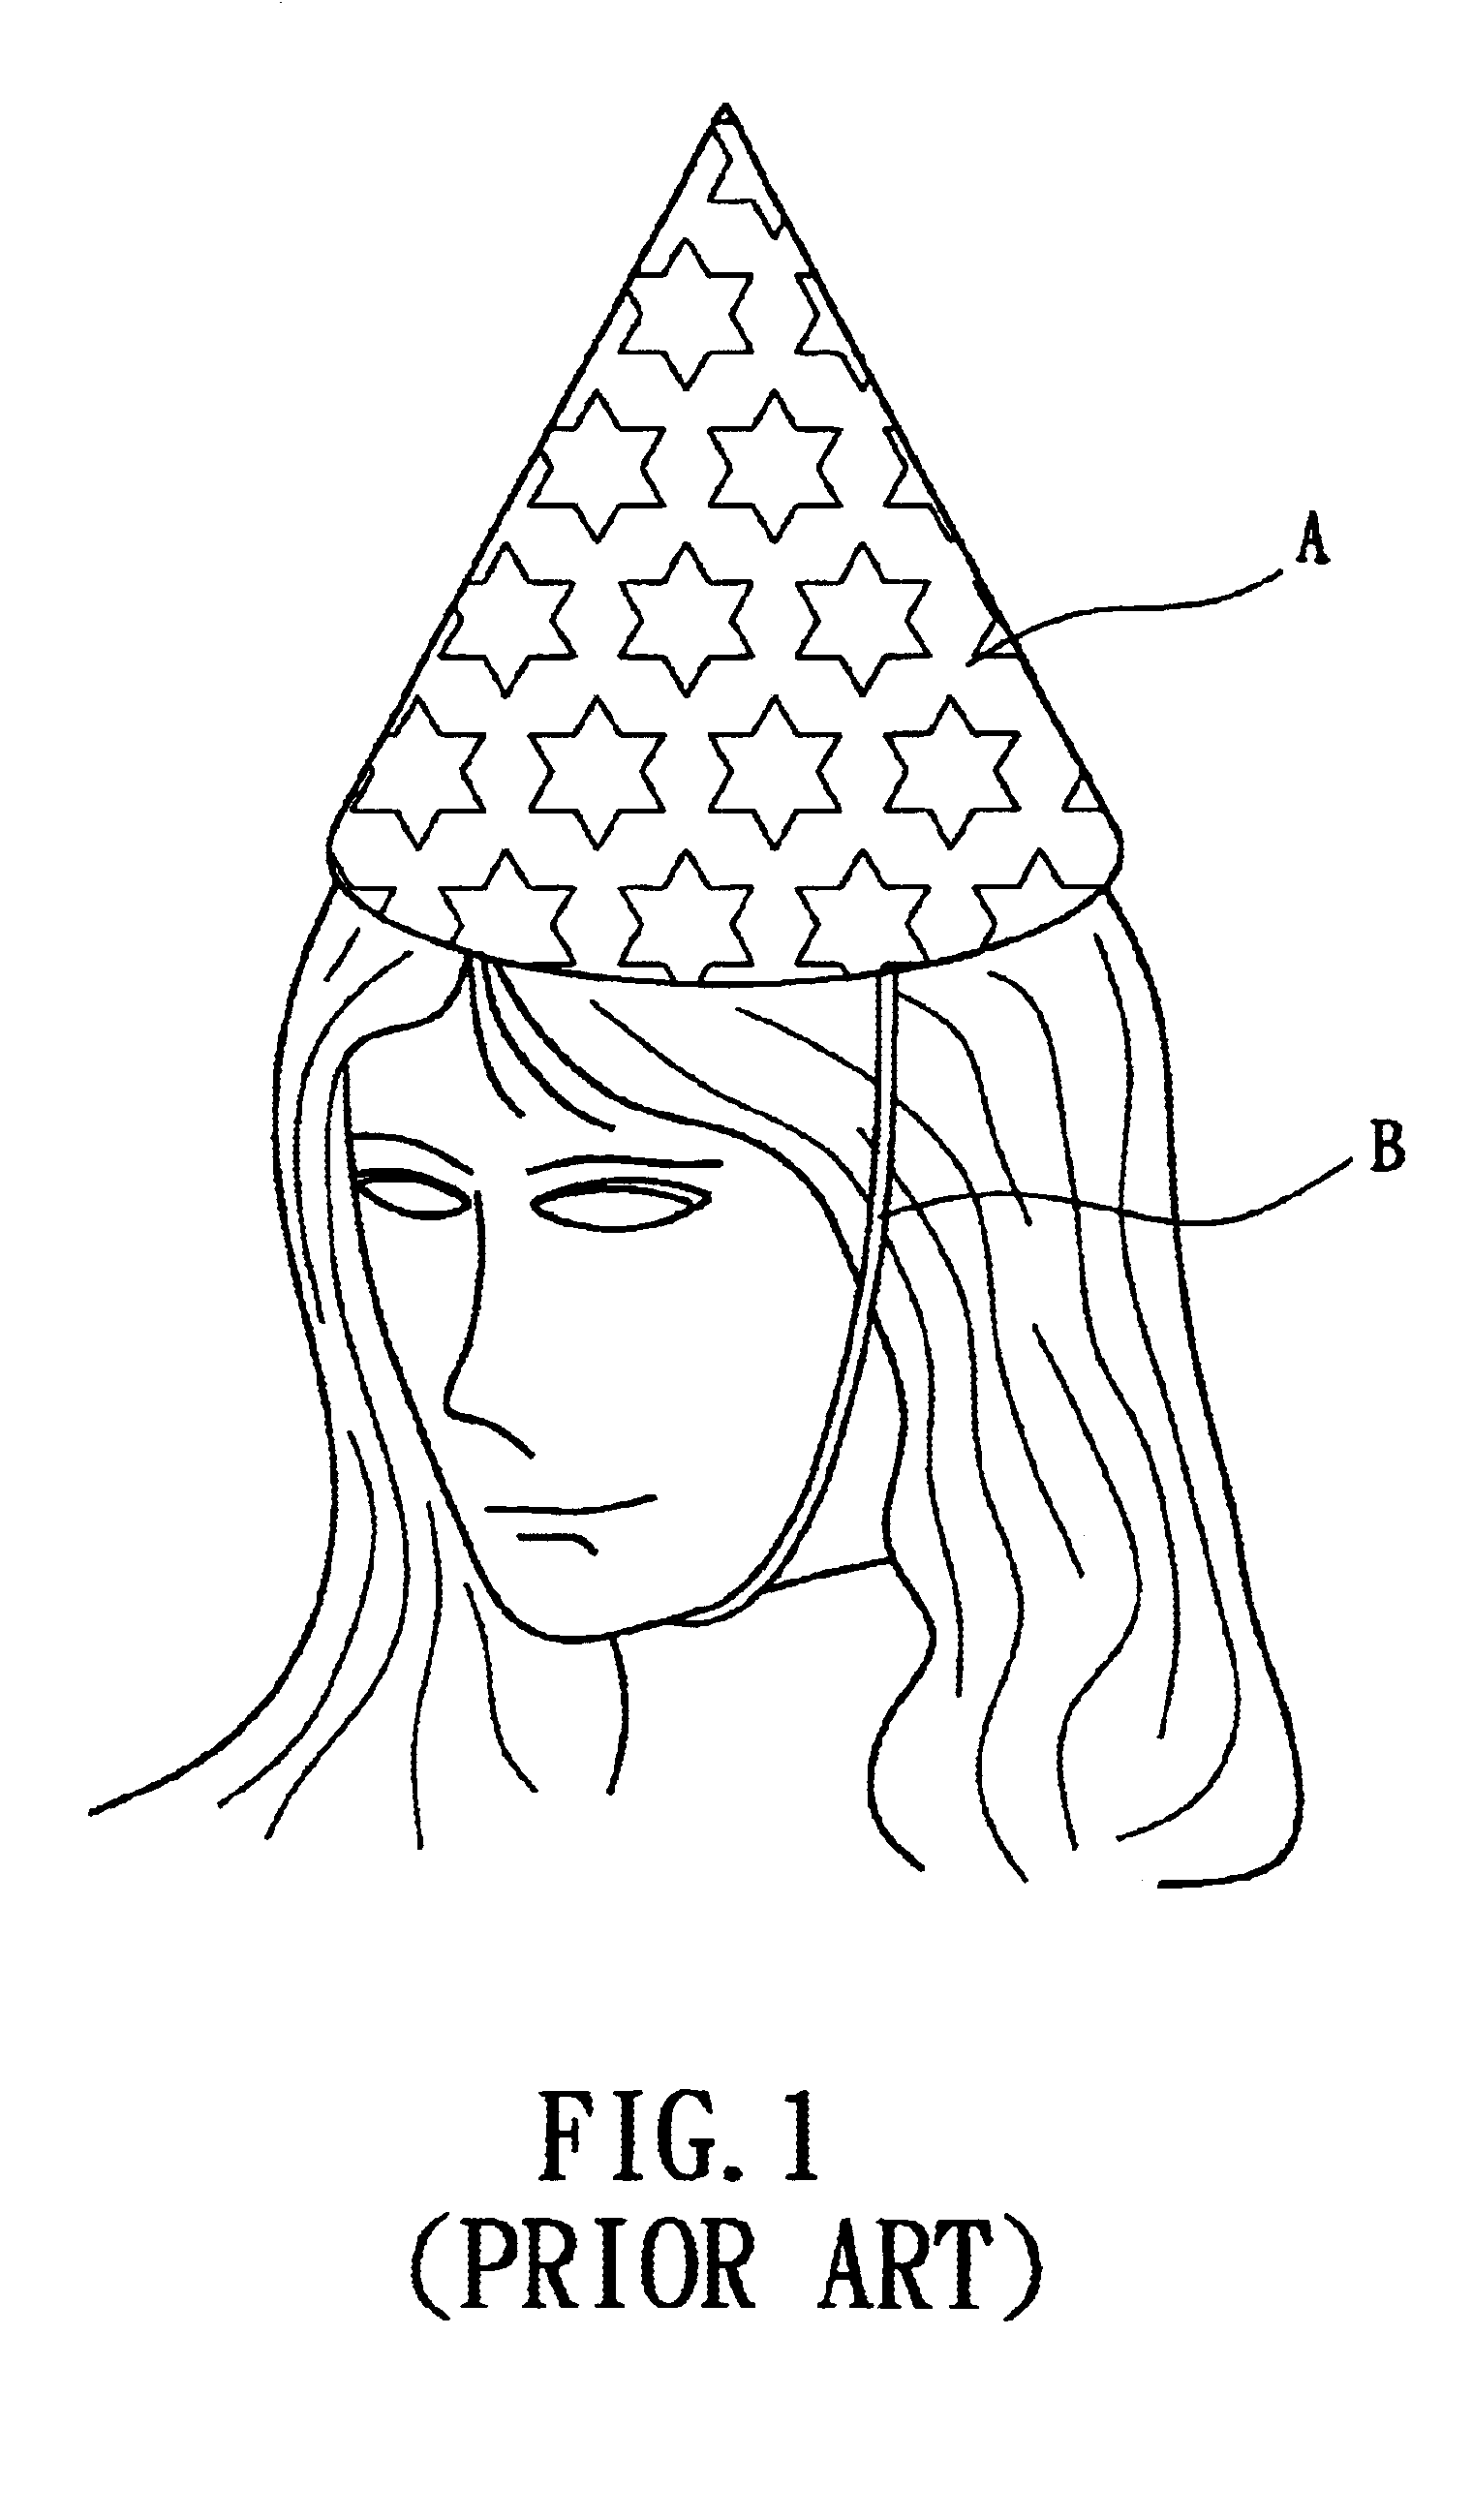 Foldable formative cap capable of opening automatically